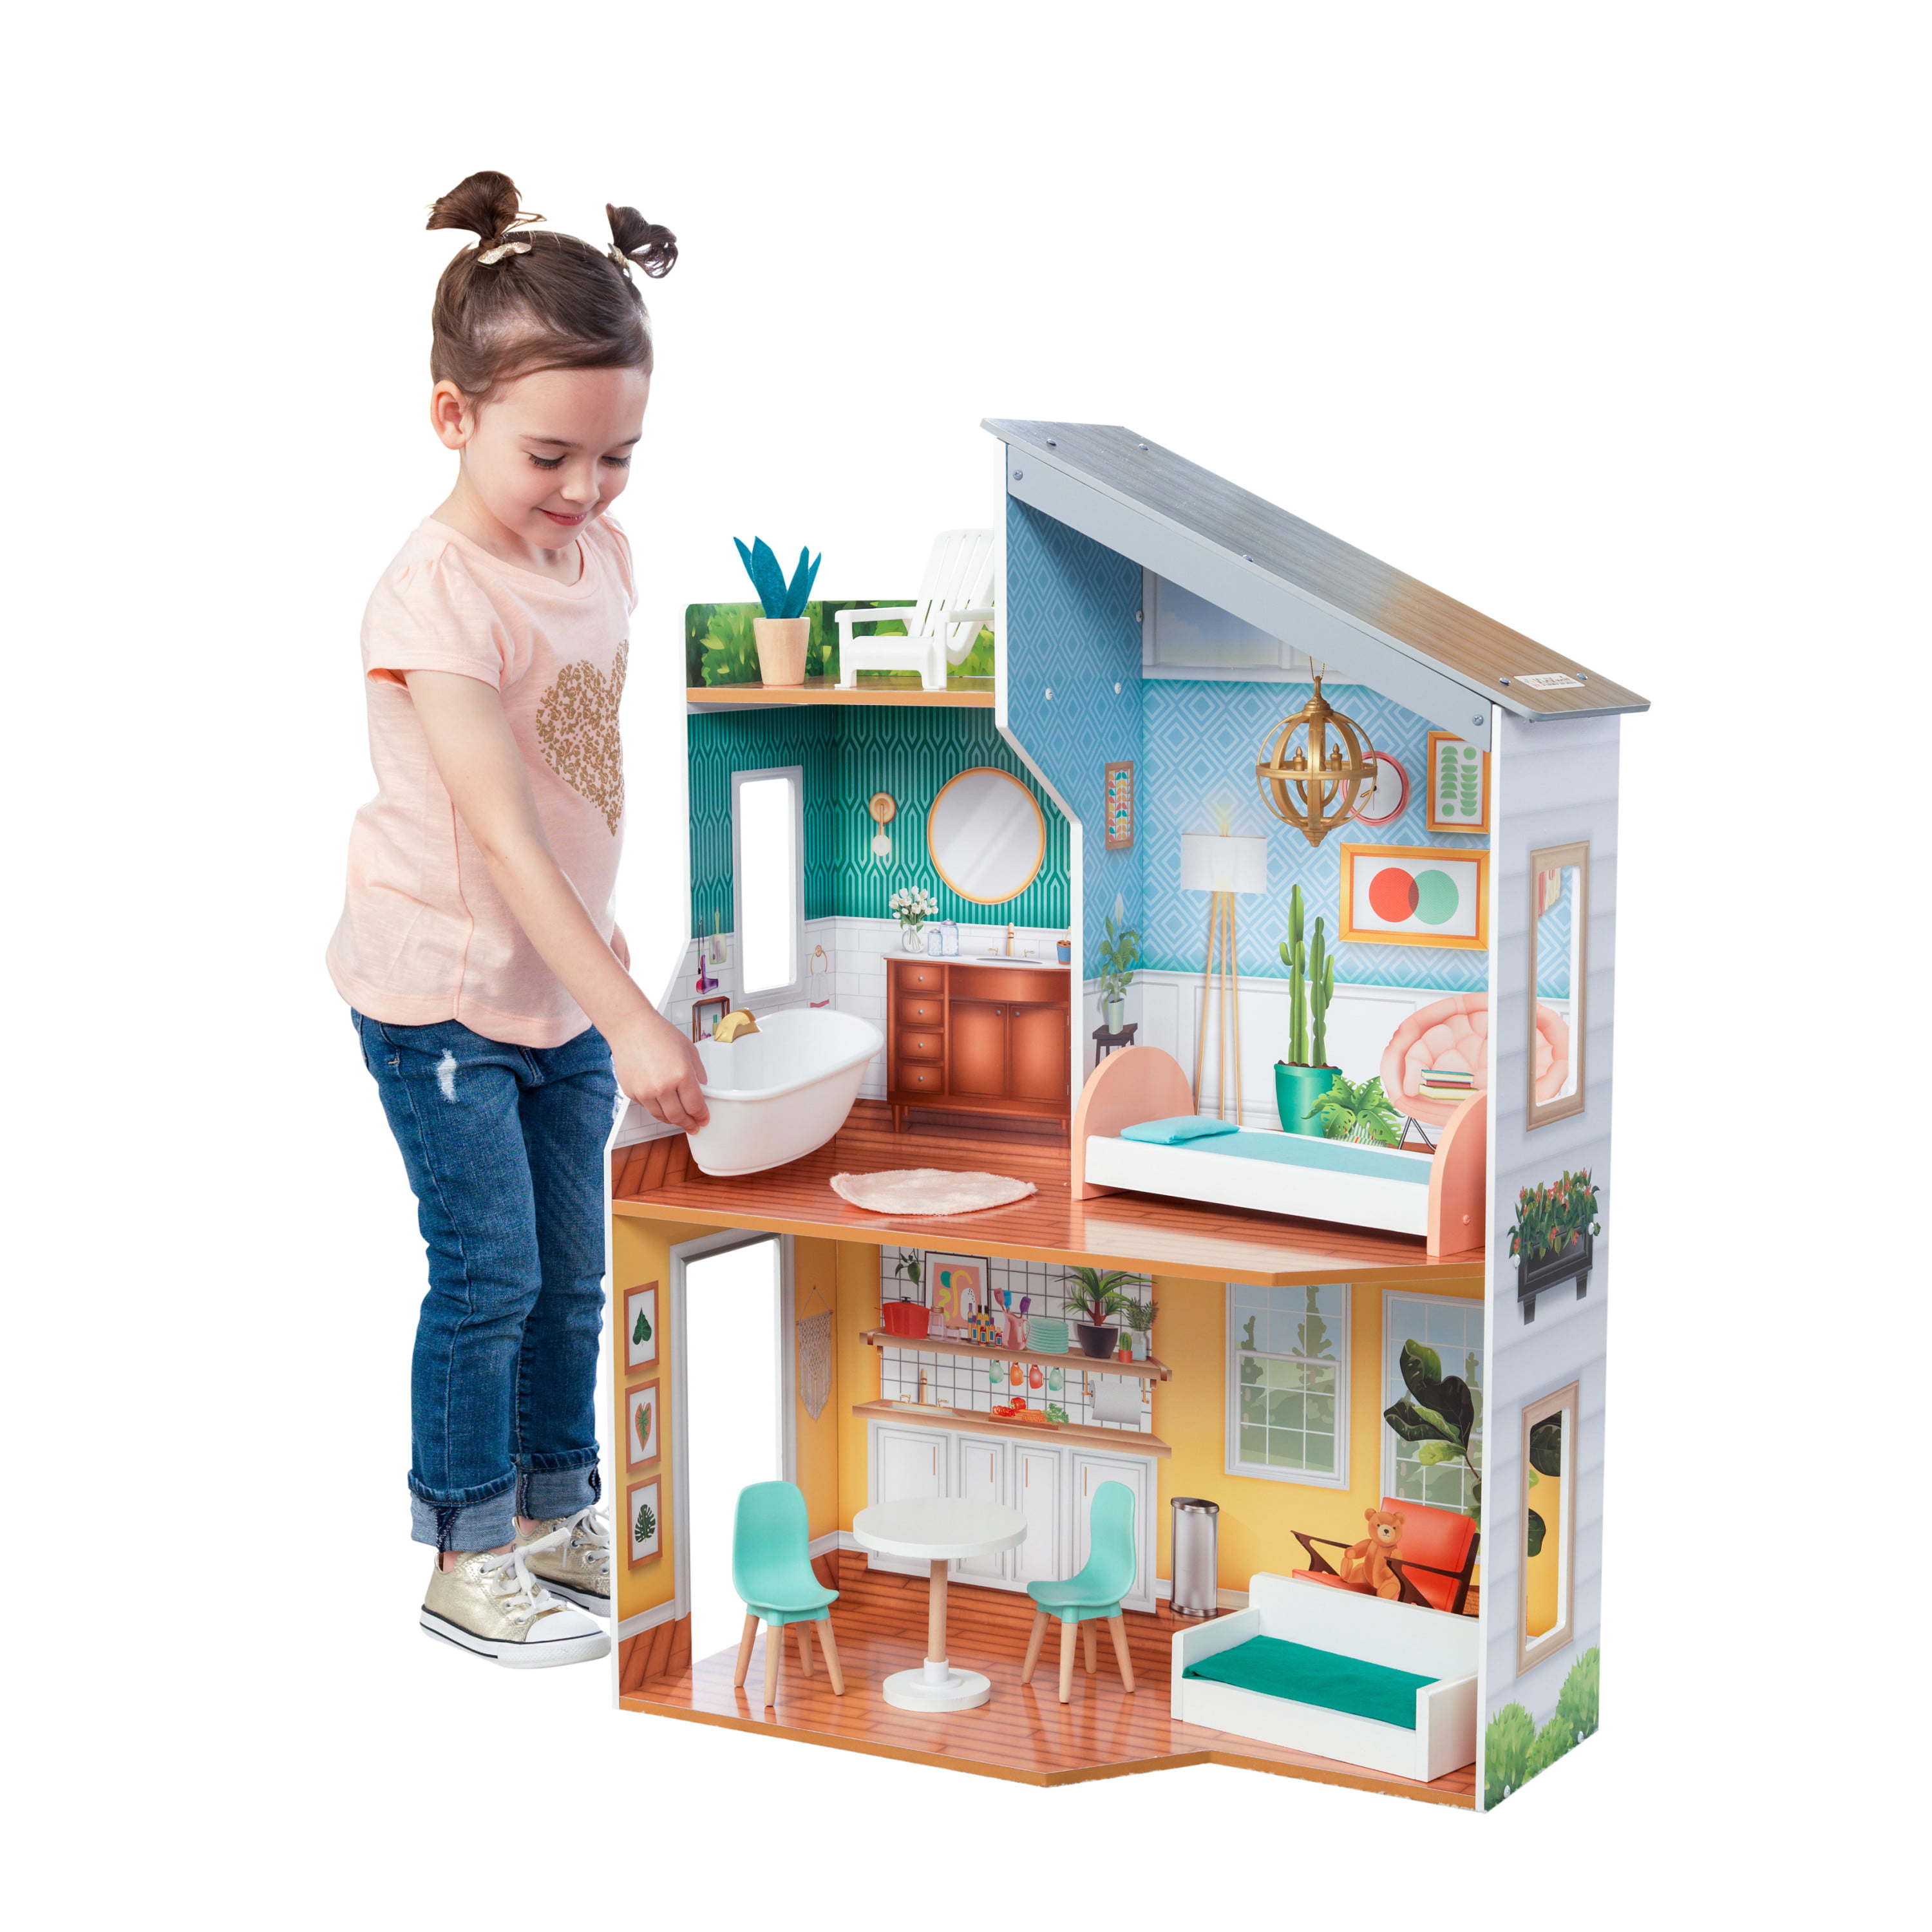 KidKraft Emily Wooden Dollhouse with 10 Accessories Included